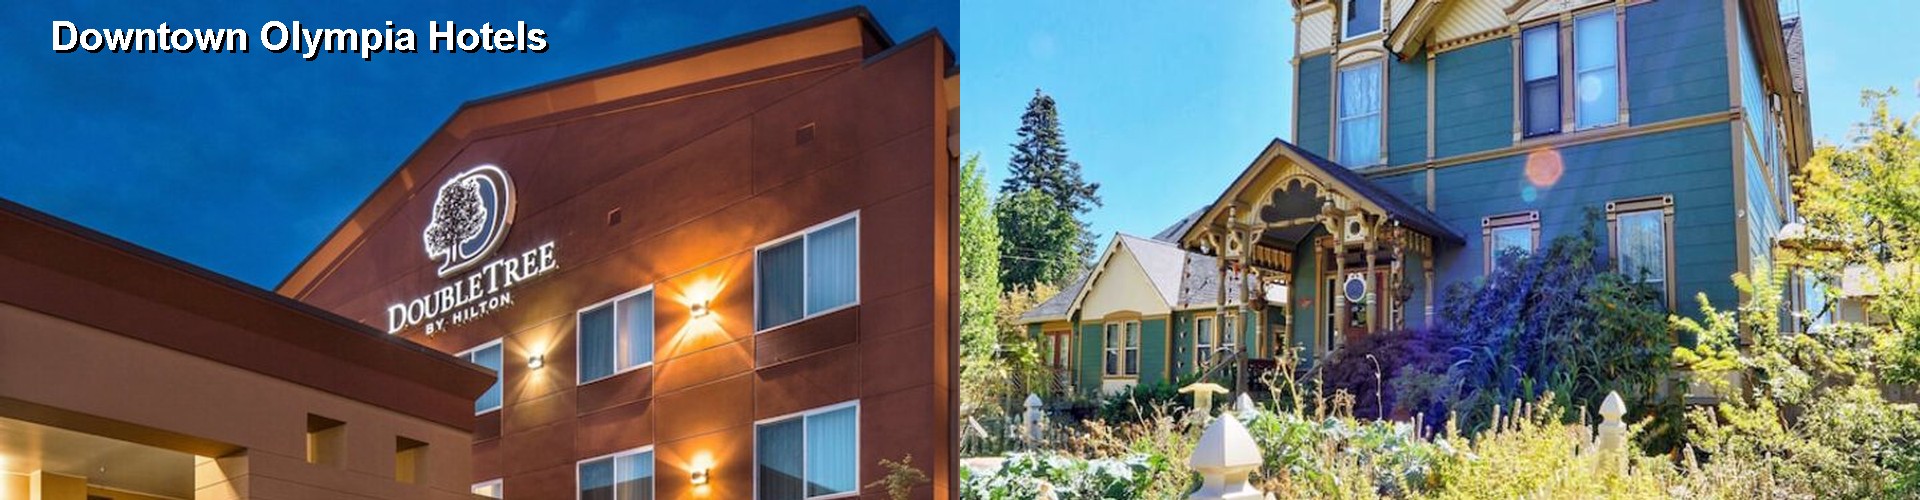 5 Best Hotels near Downtown Olympia